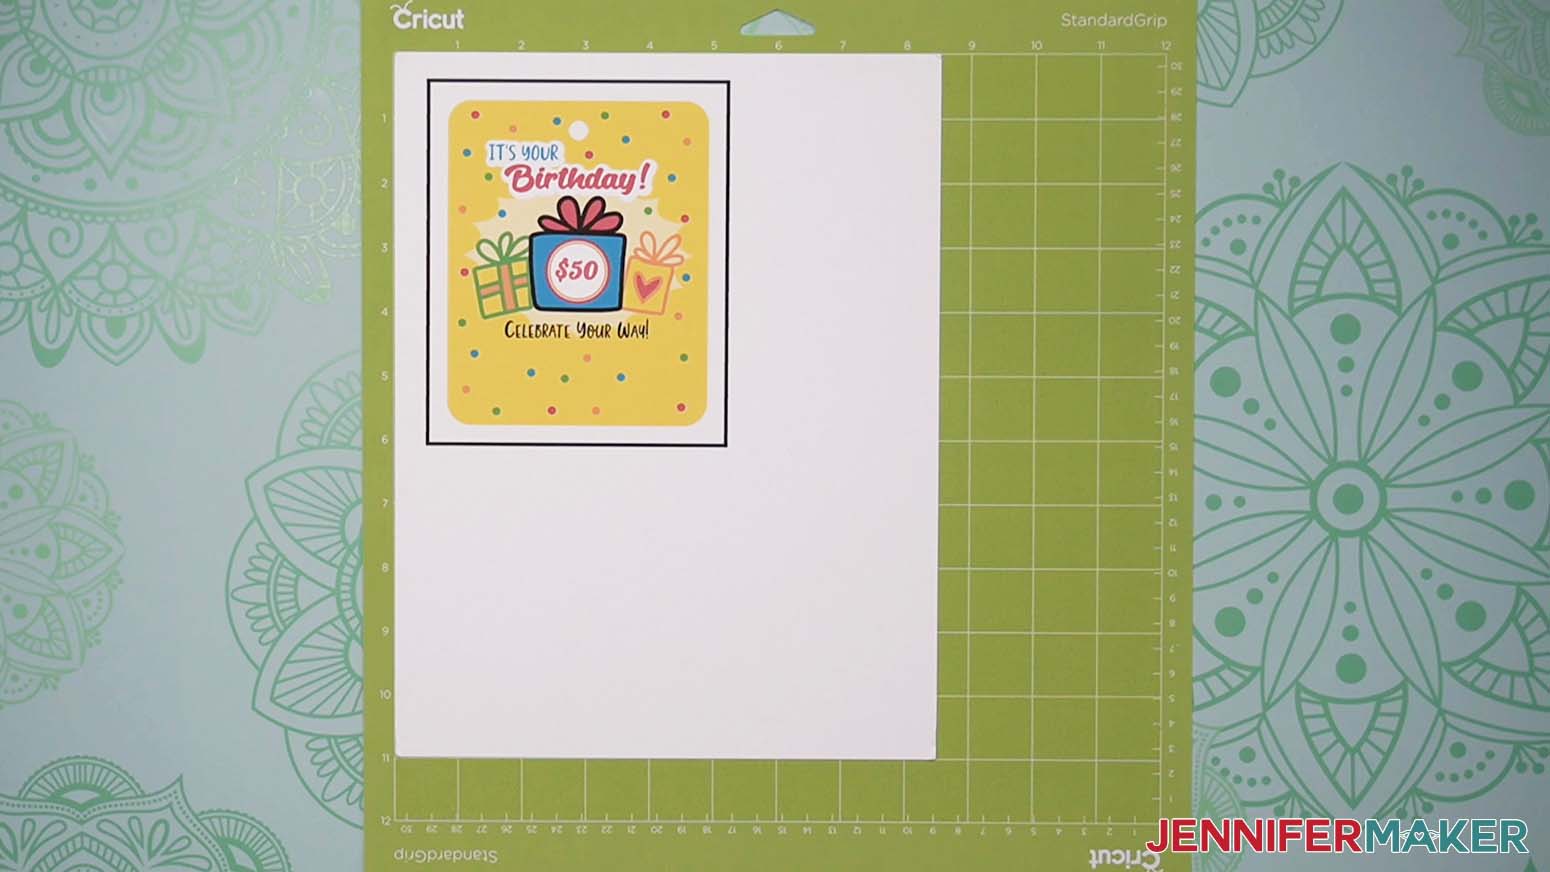 The printed birthday design on a piece of cardstock is adhered to a green machine mat for the DIY money holders project